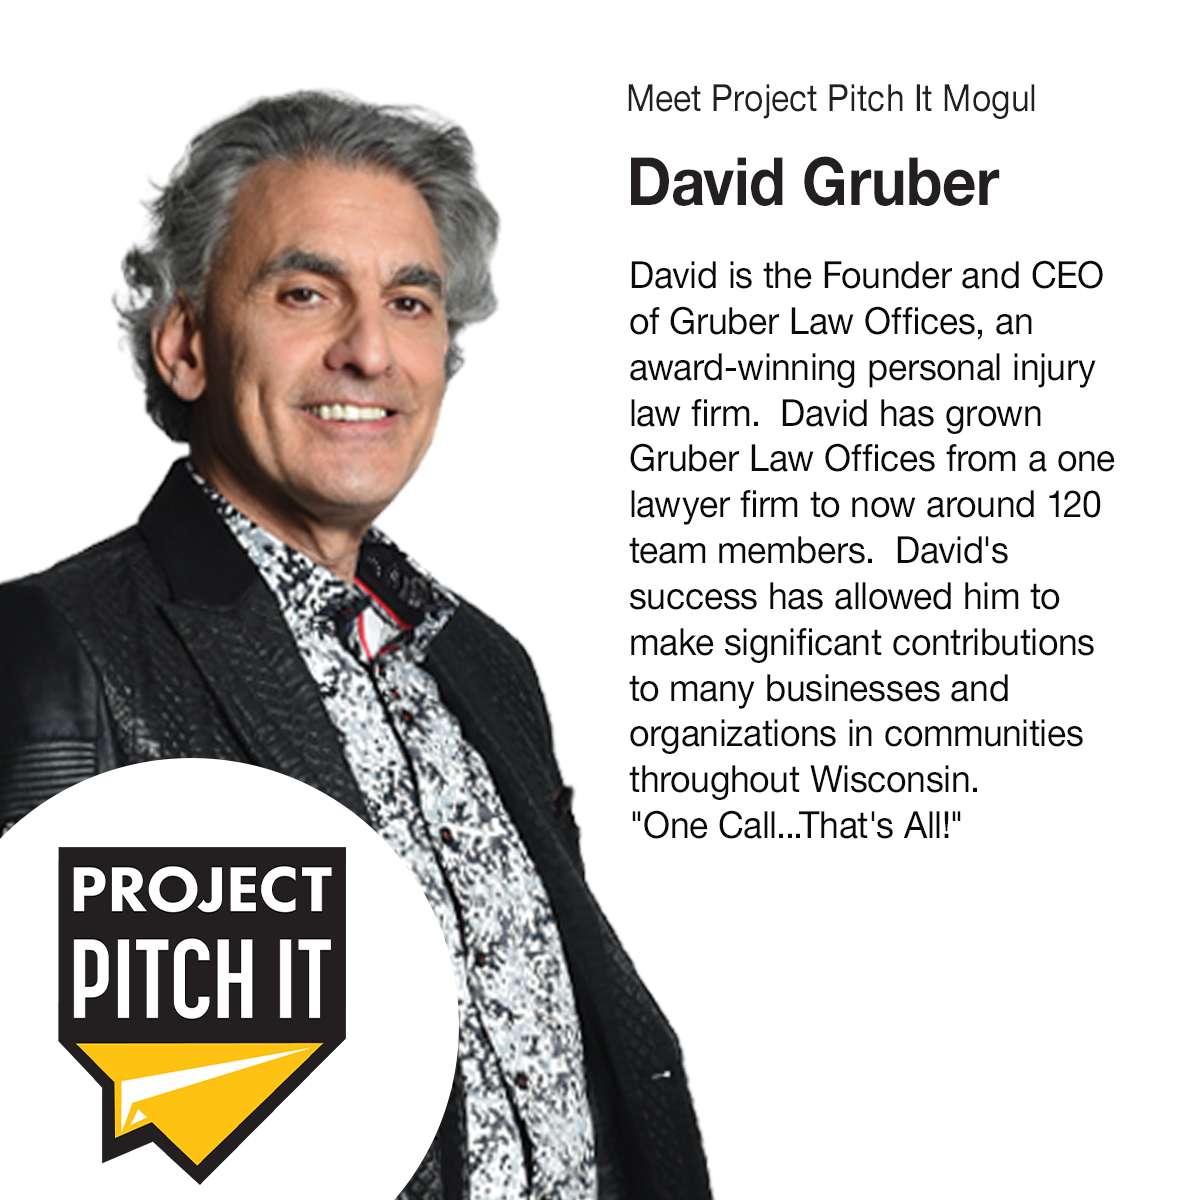 Get-to-know-project-pitch-it-mogul-david-gruber